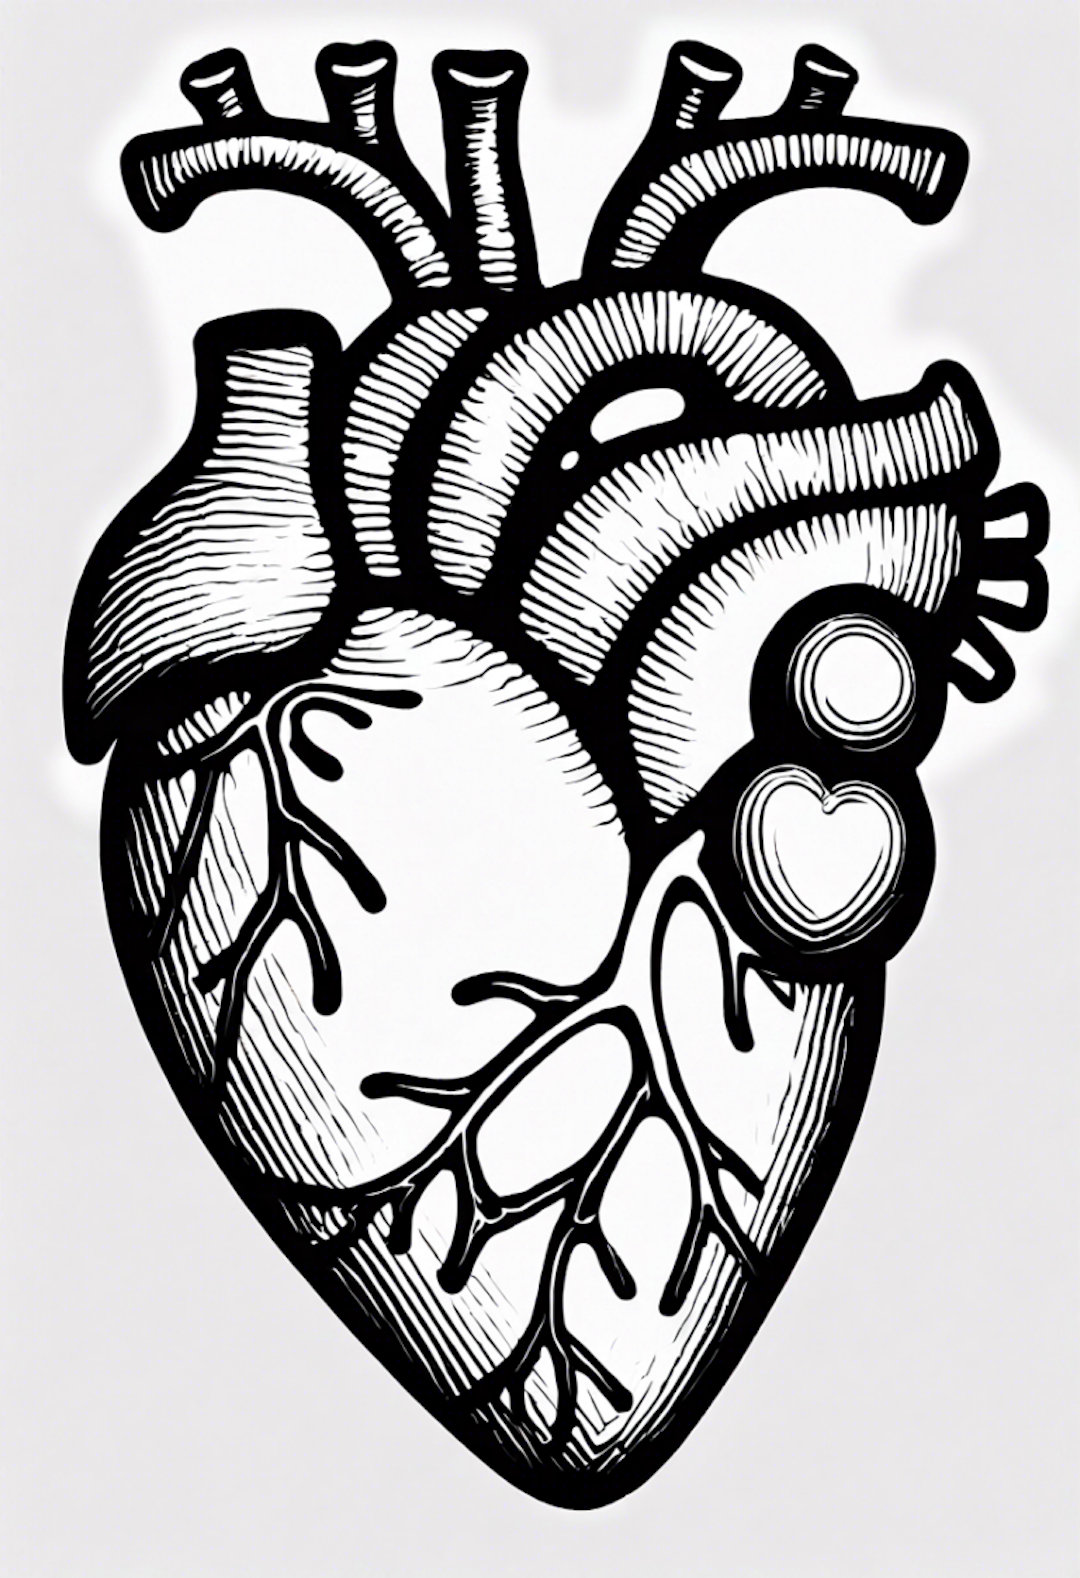 Heart coloring pages